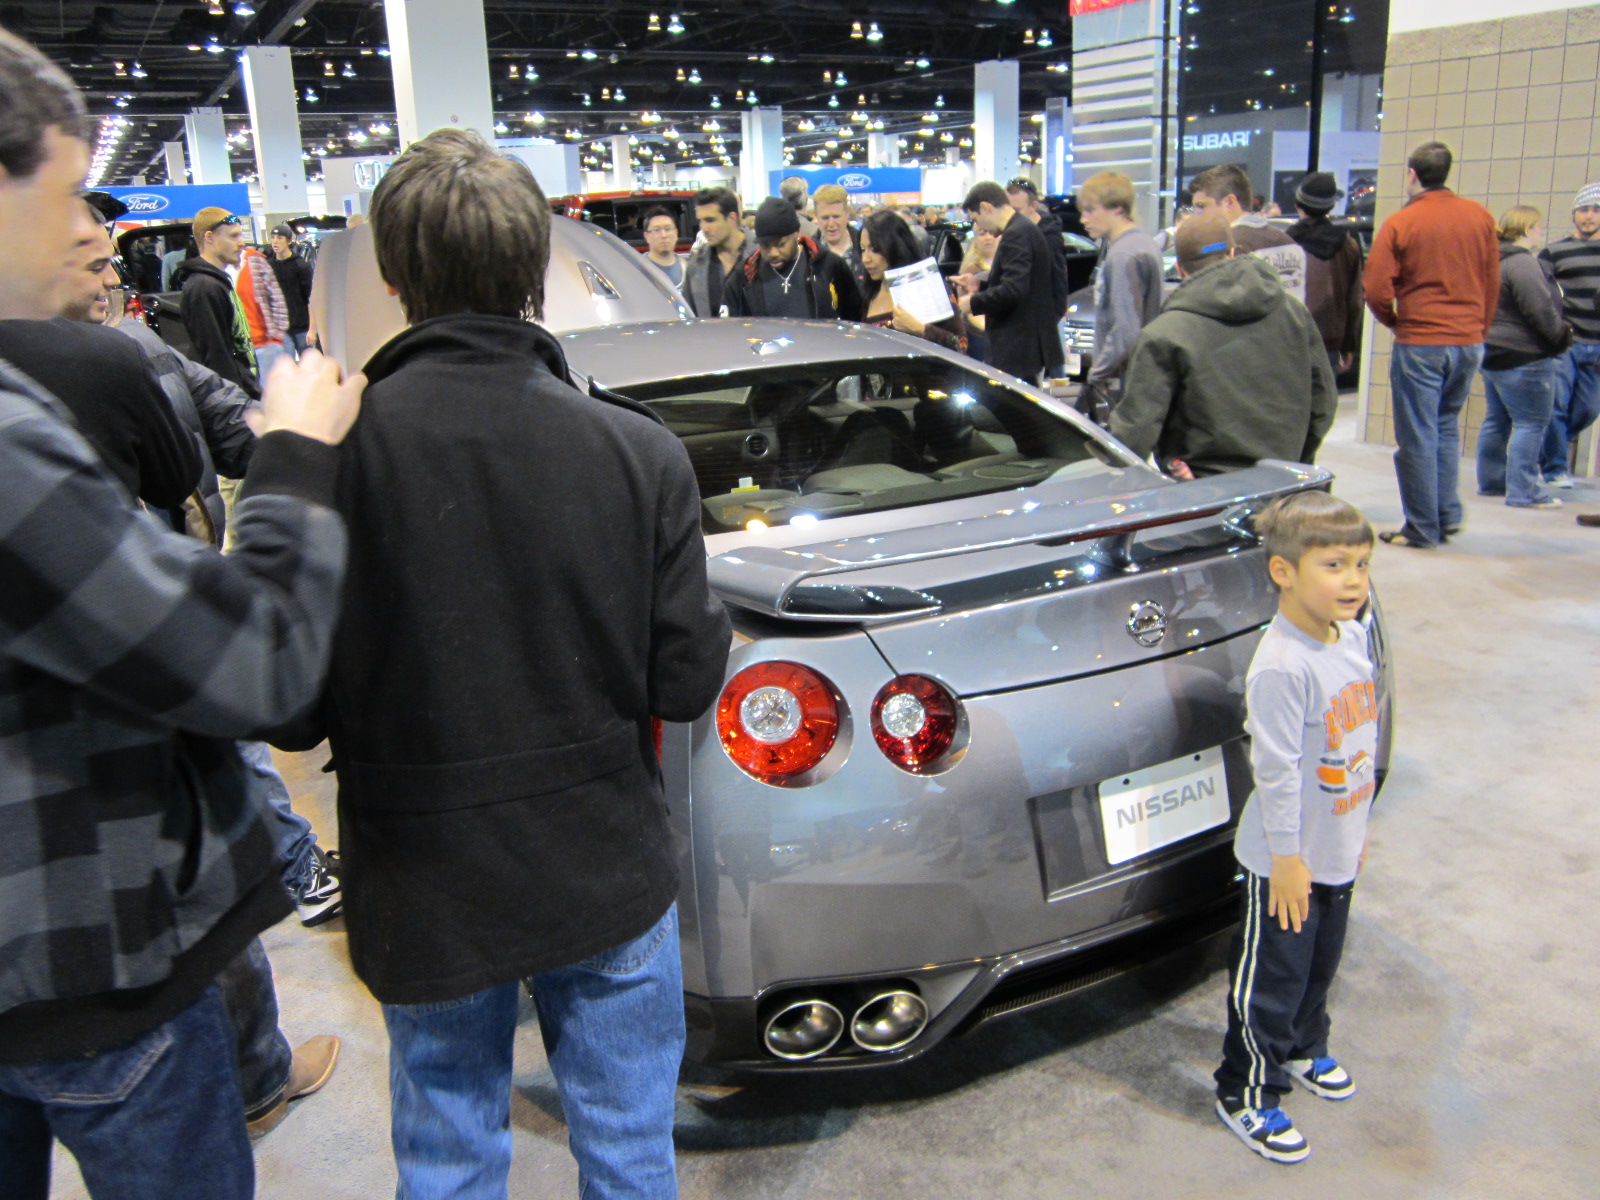 Kid obscuring the rear of the Nissan GT-R (supposedly capable of 0-60 in 2.6 seconds).